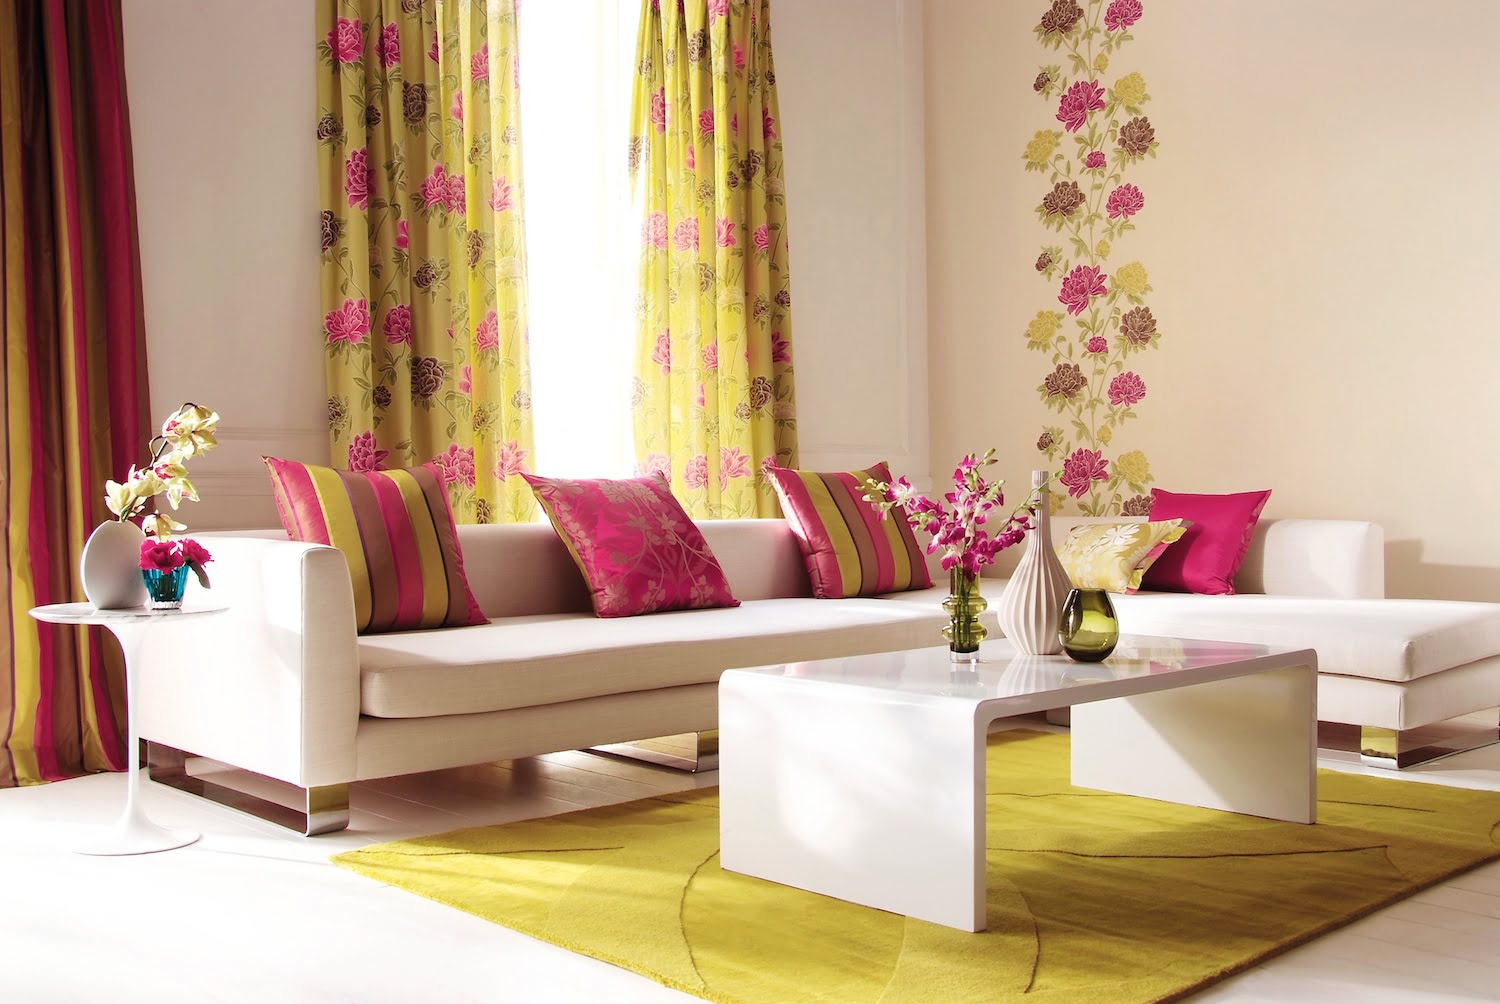 5 Curtain Colors To Avoid In A Living Room According To Designers